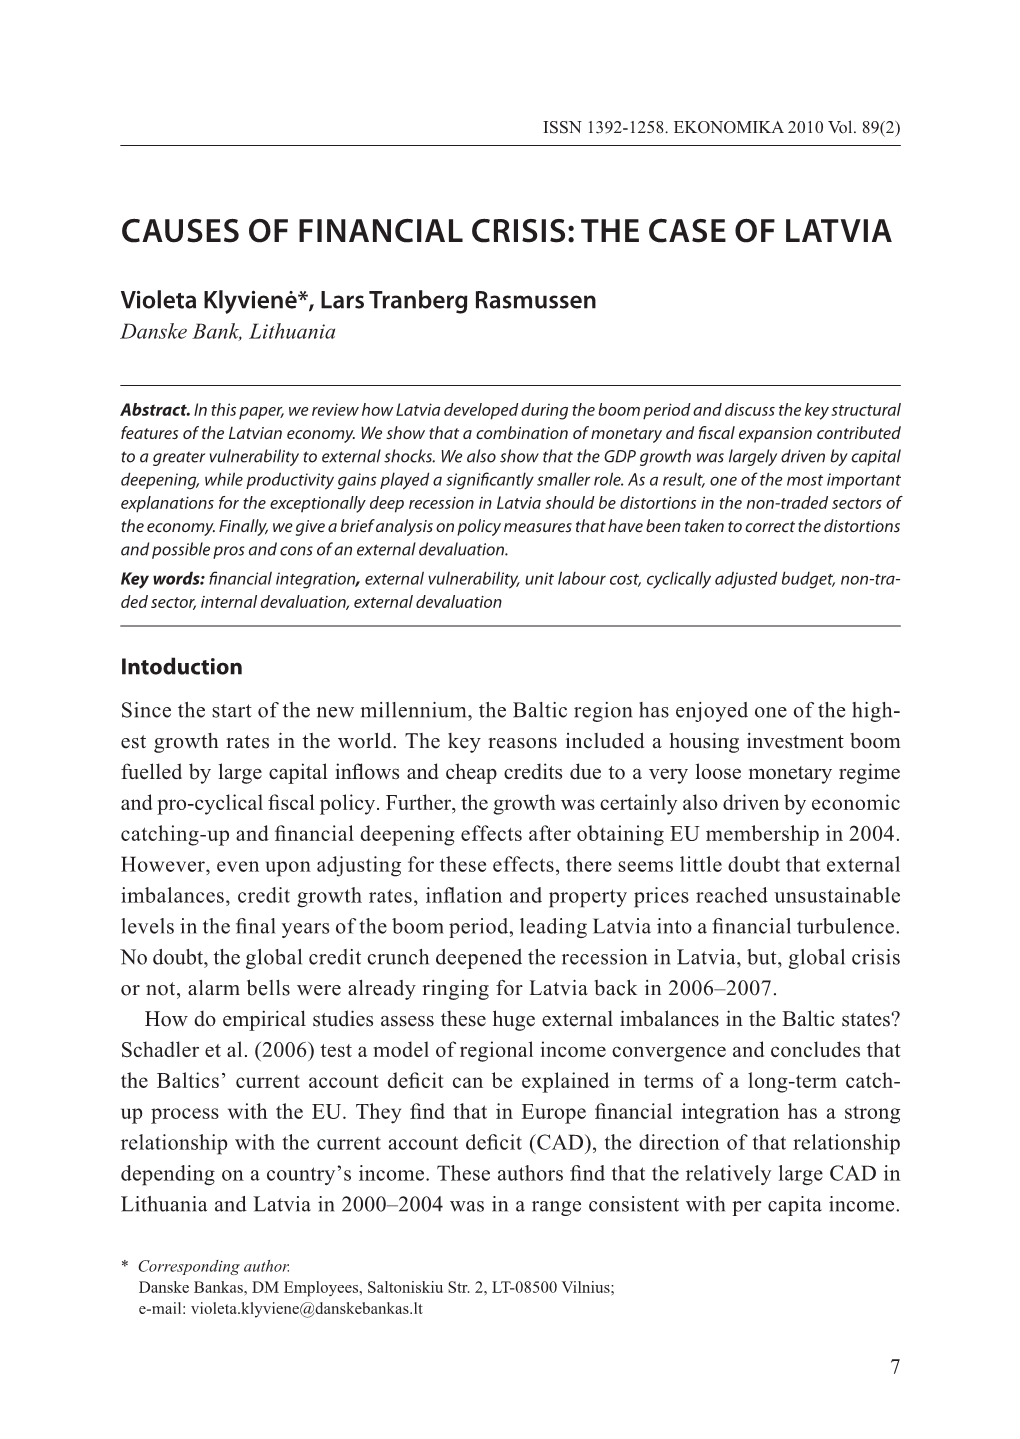 Causes of Financial Crisis: the Case of Latvia